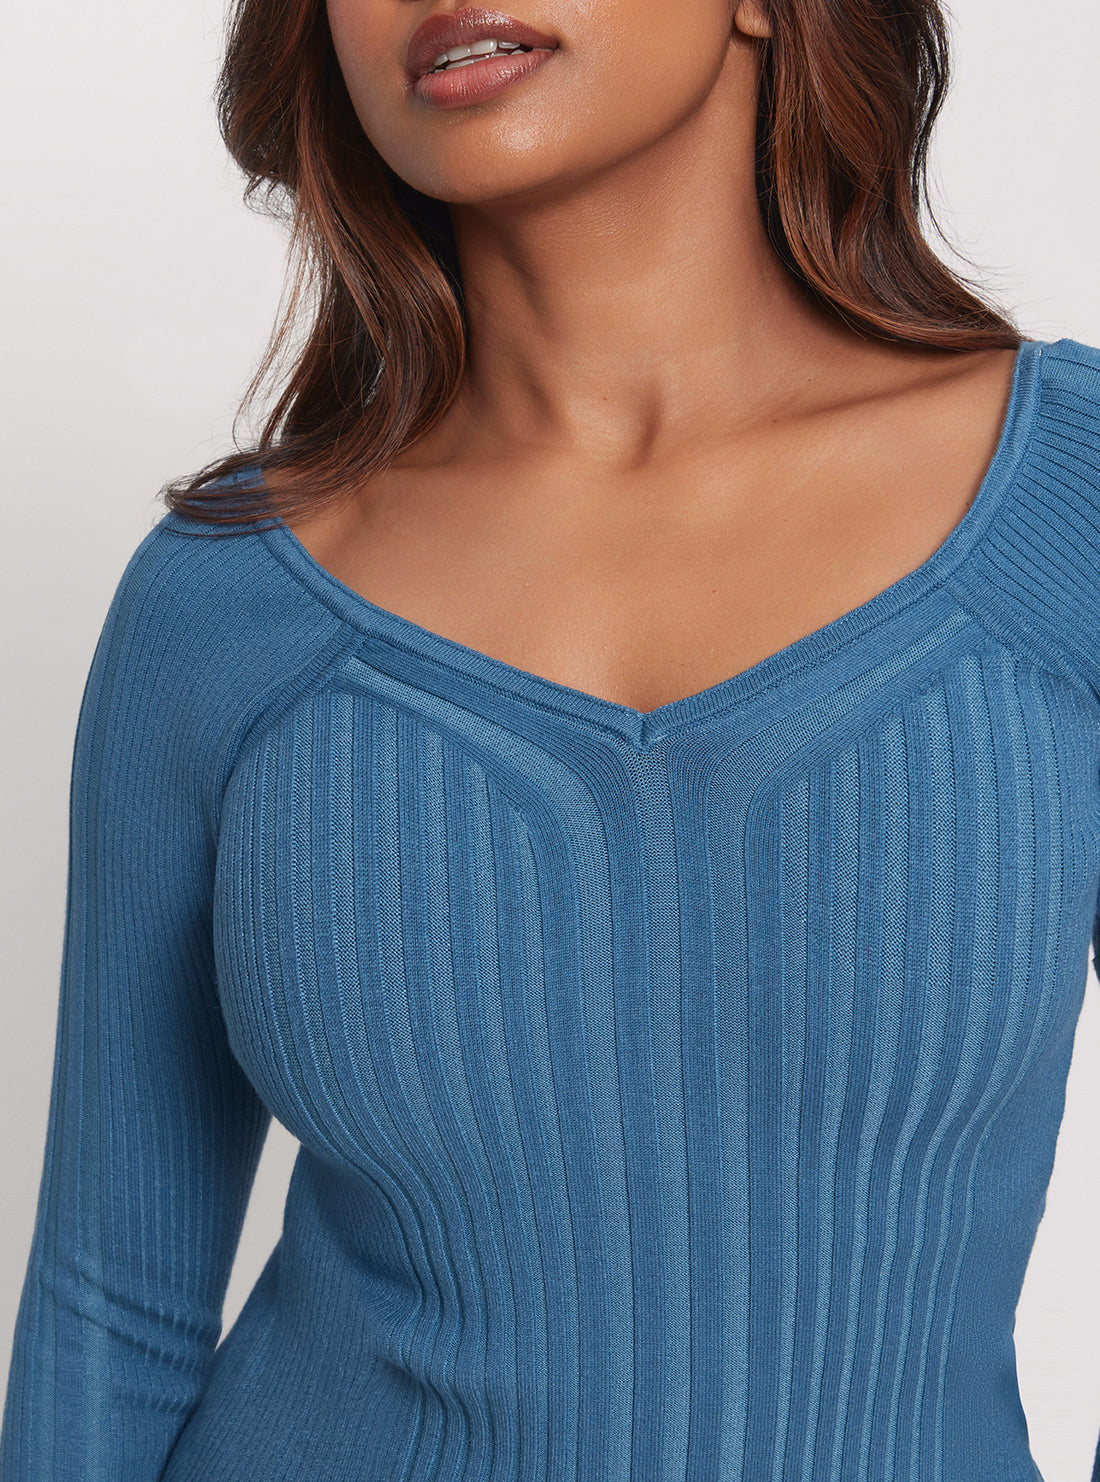 GUESS Blue Allie Long Sleeve Knit Top detail view